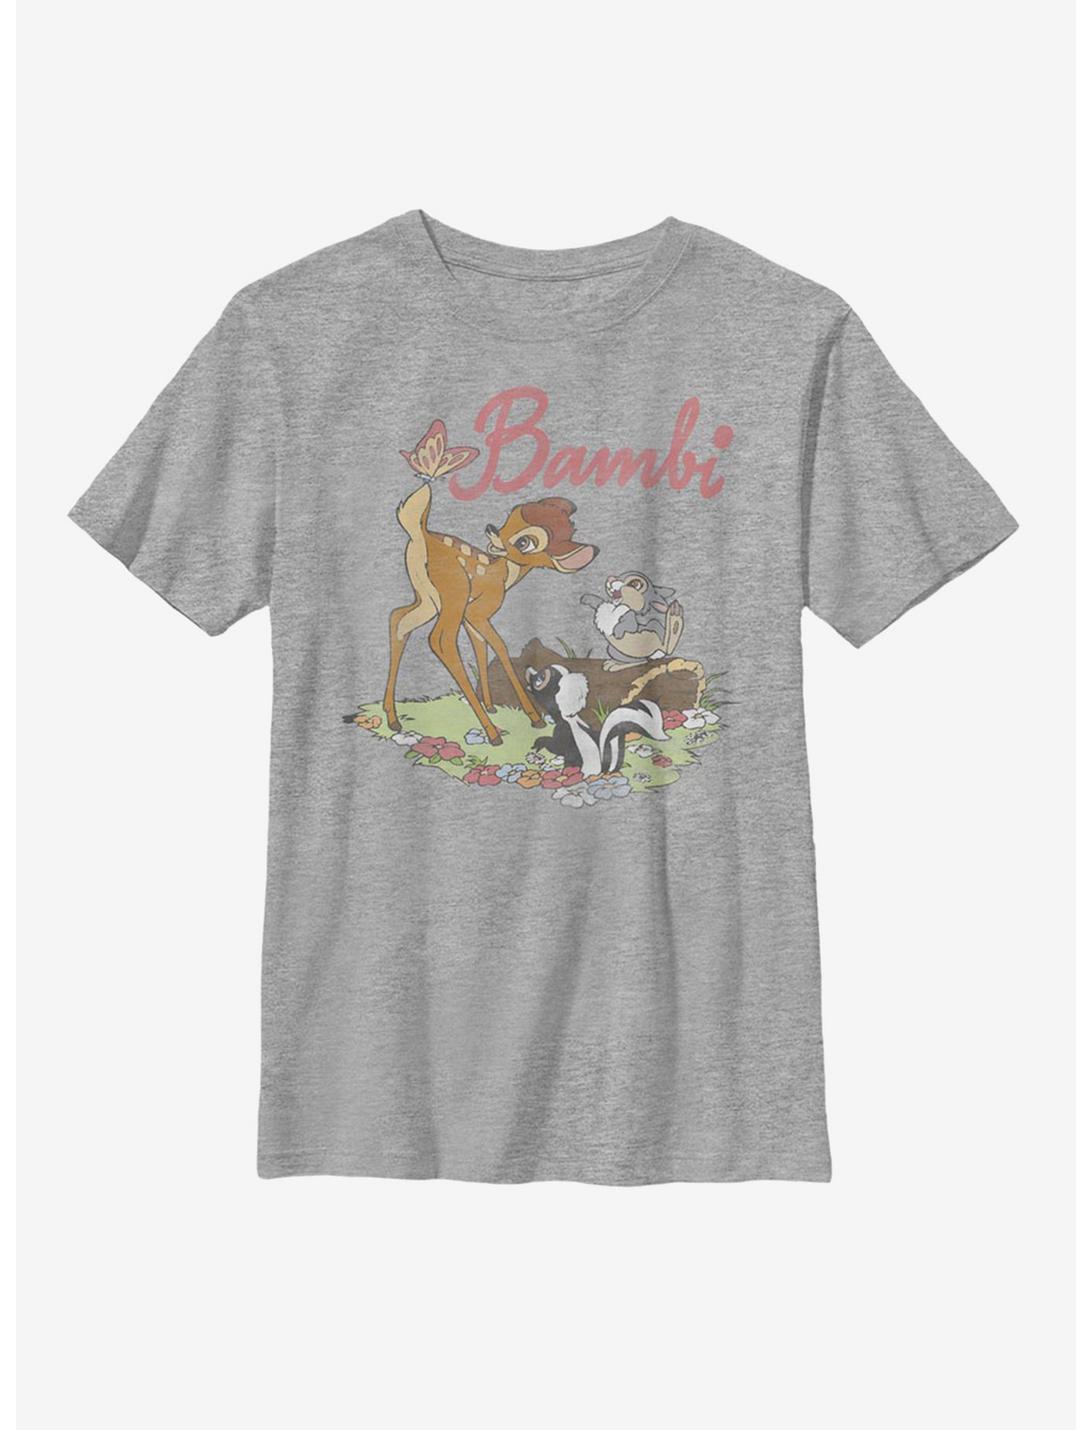 Disney Bambi Meadow Friends Youth T-Shirt, ATH HTR, hi-res